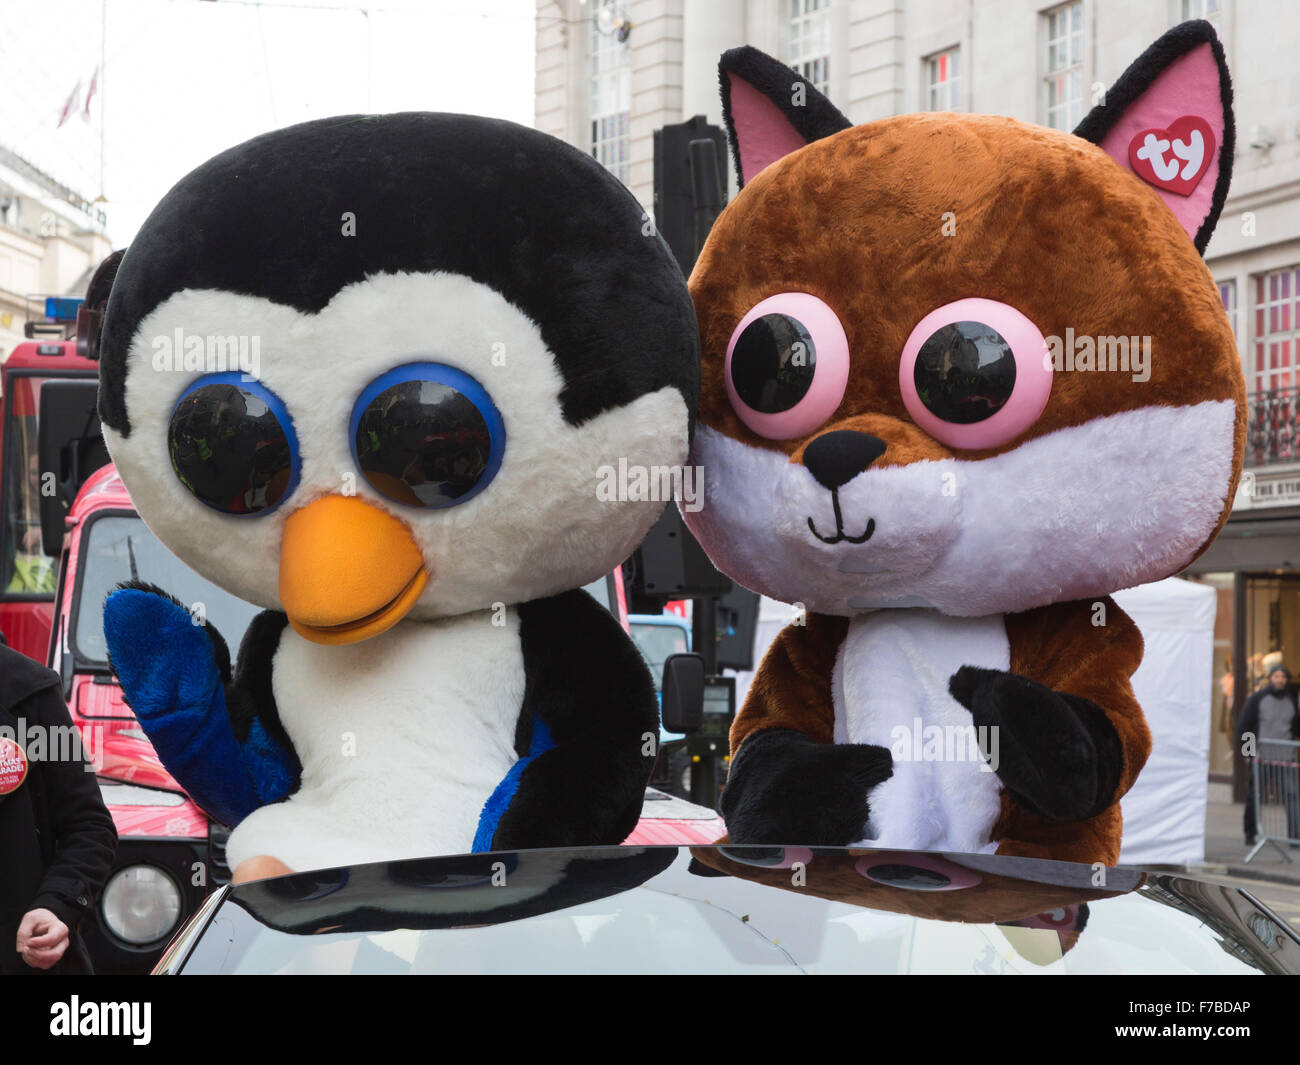 London, UK. 28 November 2015. Beanie Boos characters on parade. The  inaugural Hamleys Christmas Toy Parade takes place along Regent Street,  which went traffic-free for the day. The parade organised by the